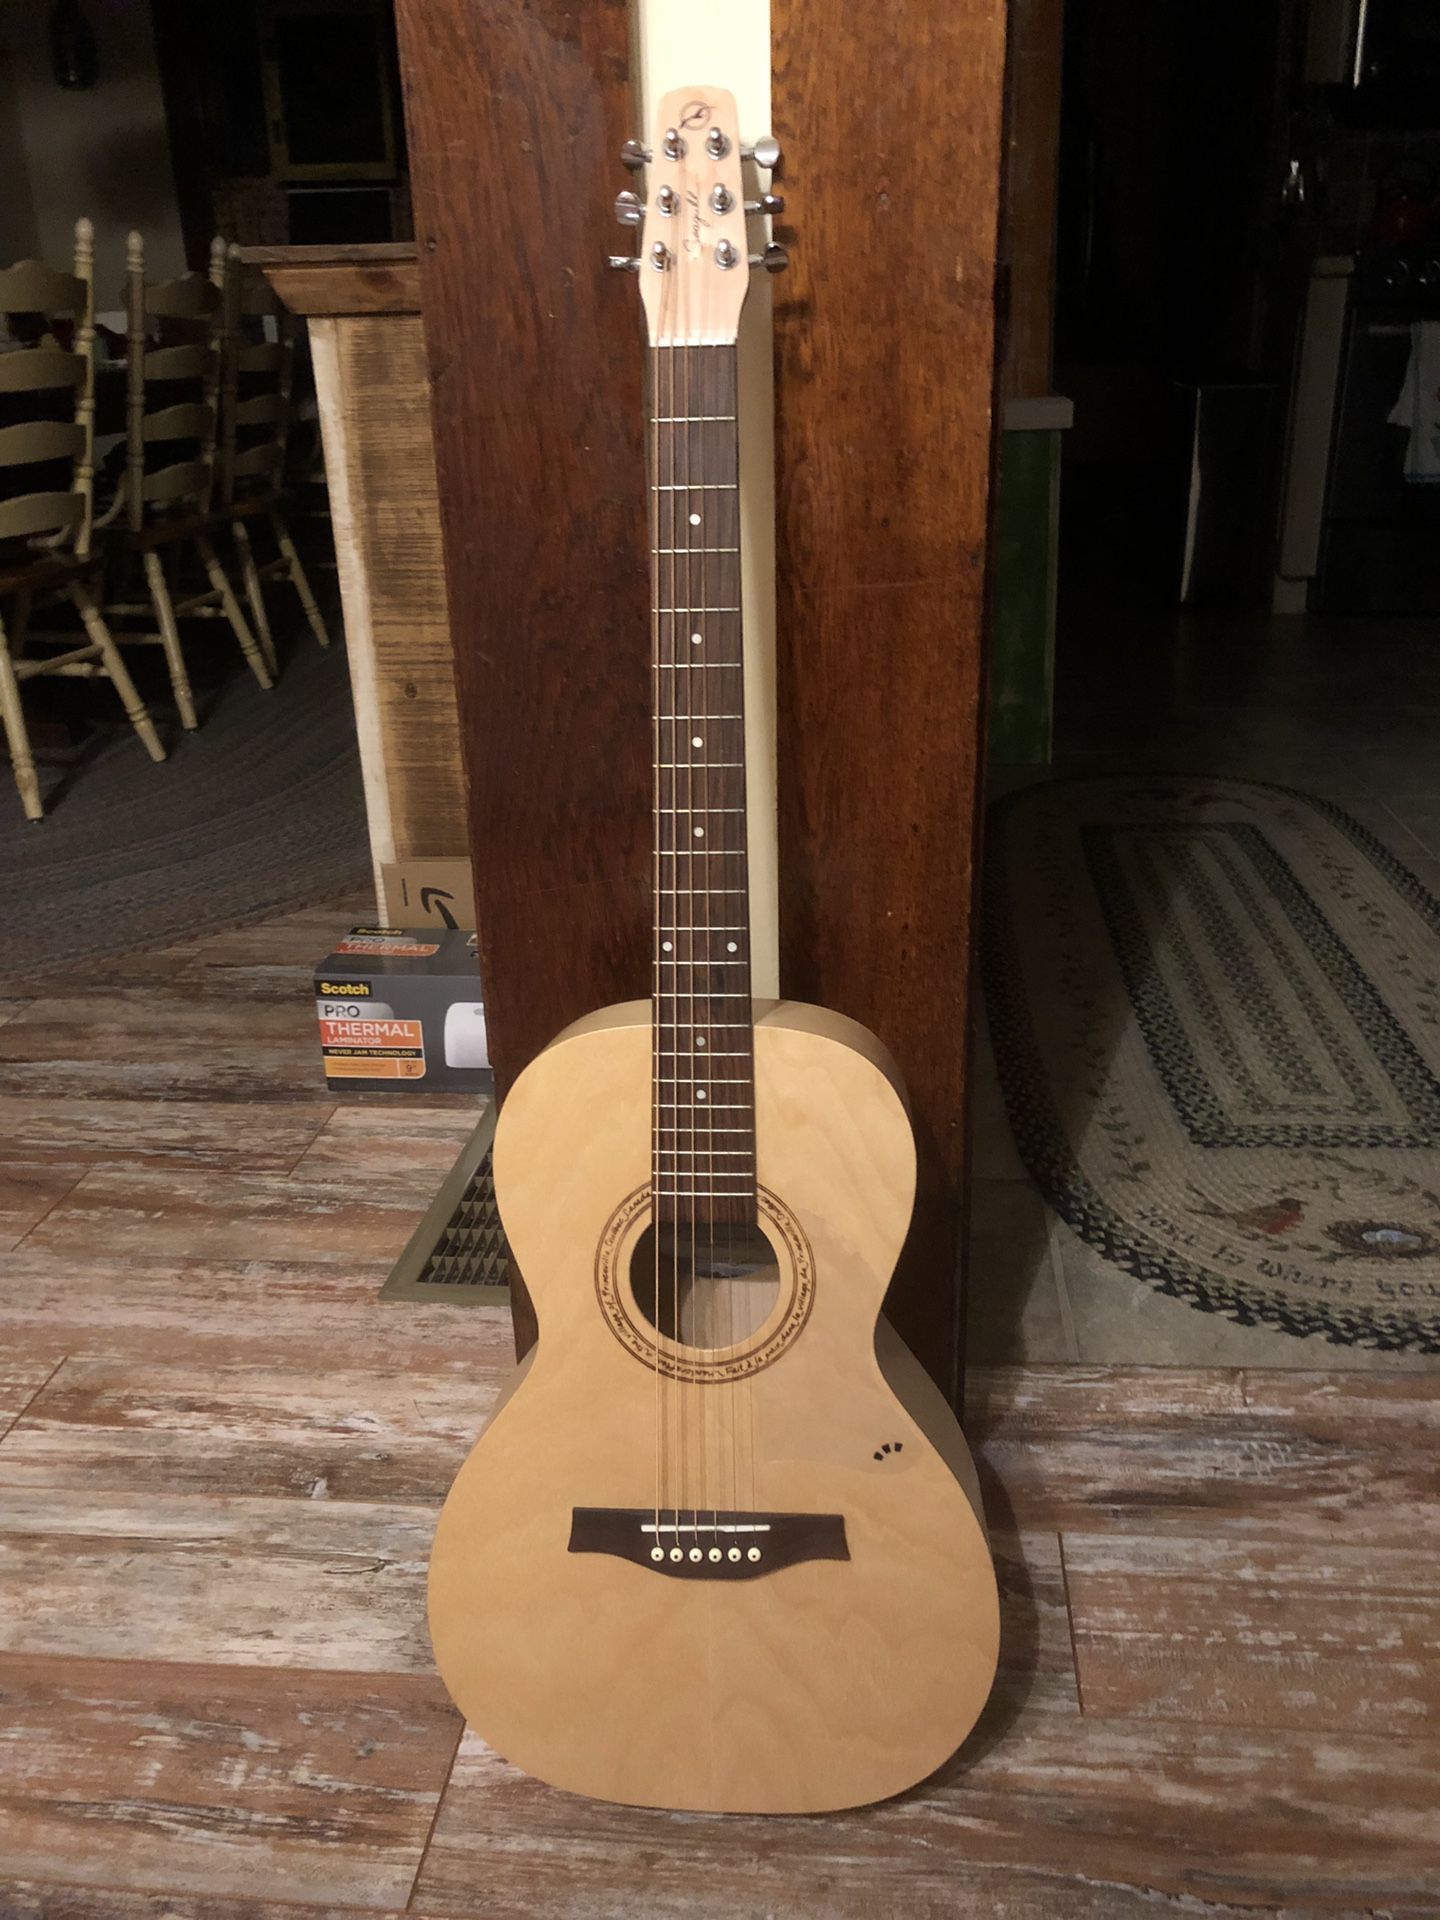 Seagull Excursion parlor guitar with case $200 TODAY ONLY!!!